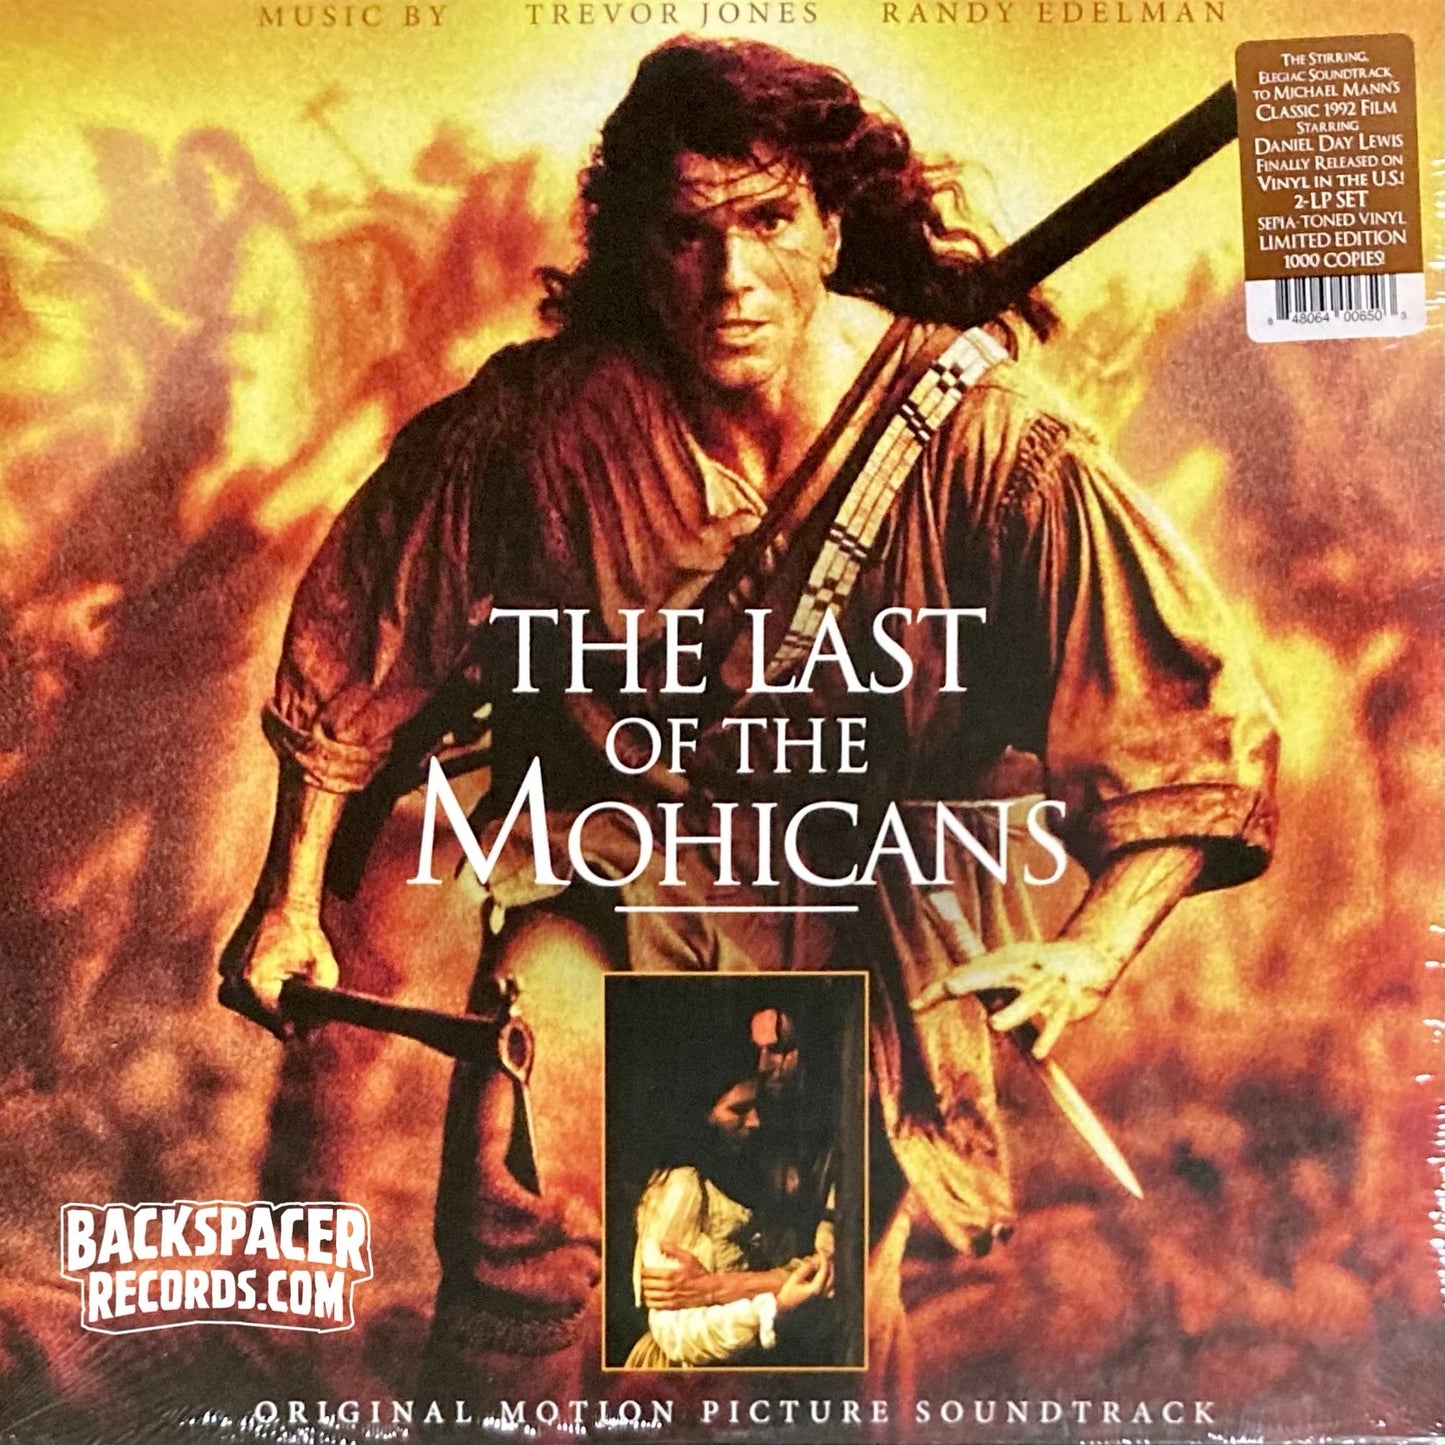 Trevor Jones, Randy Edelman - The Last Of The Mohicans: Original Motion Picture Soundtrack (Limited Edition) 2-LP (Sealed)